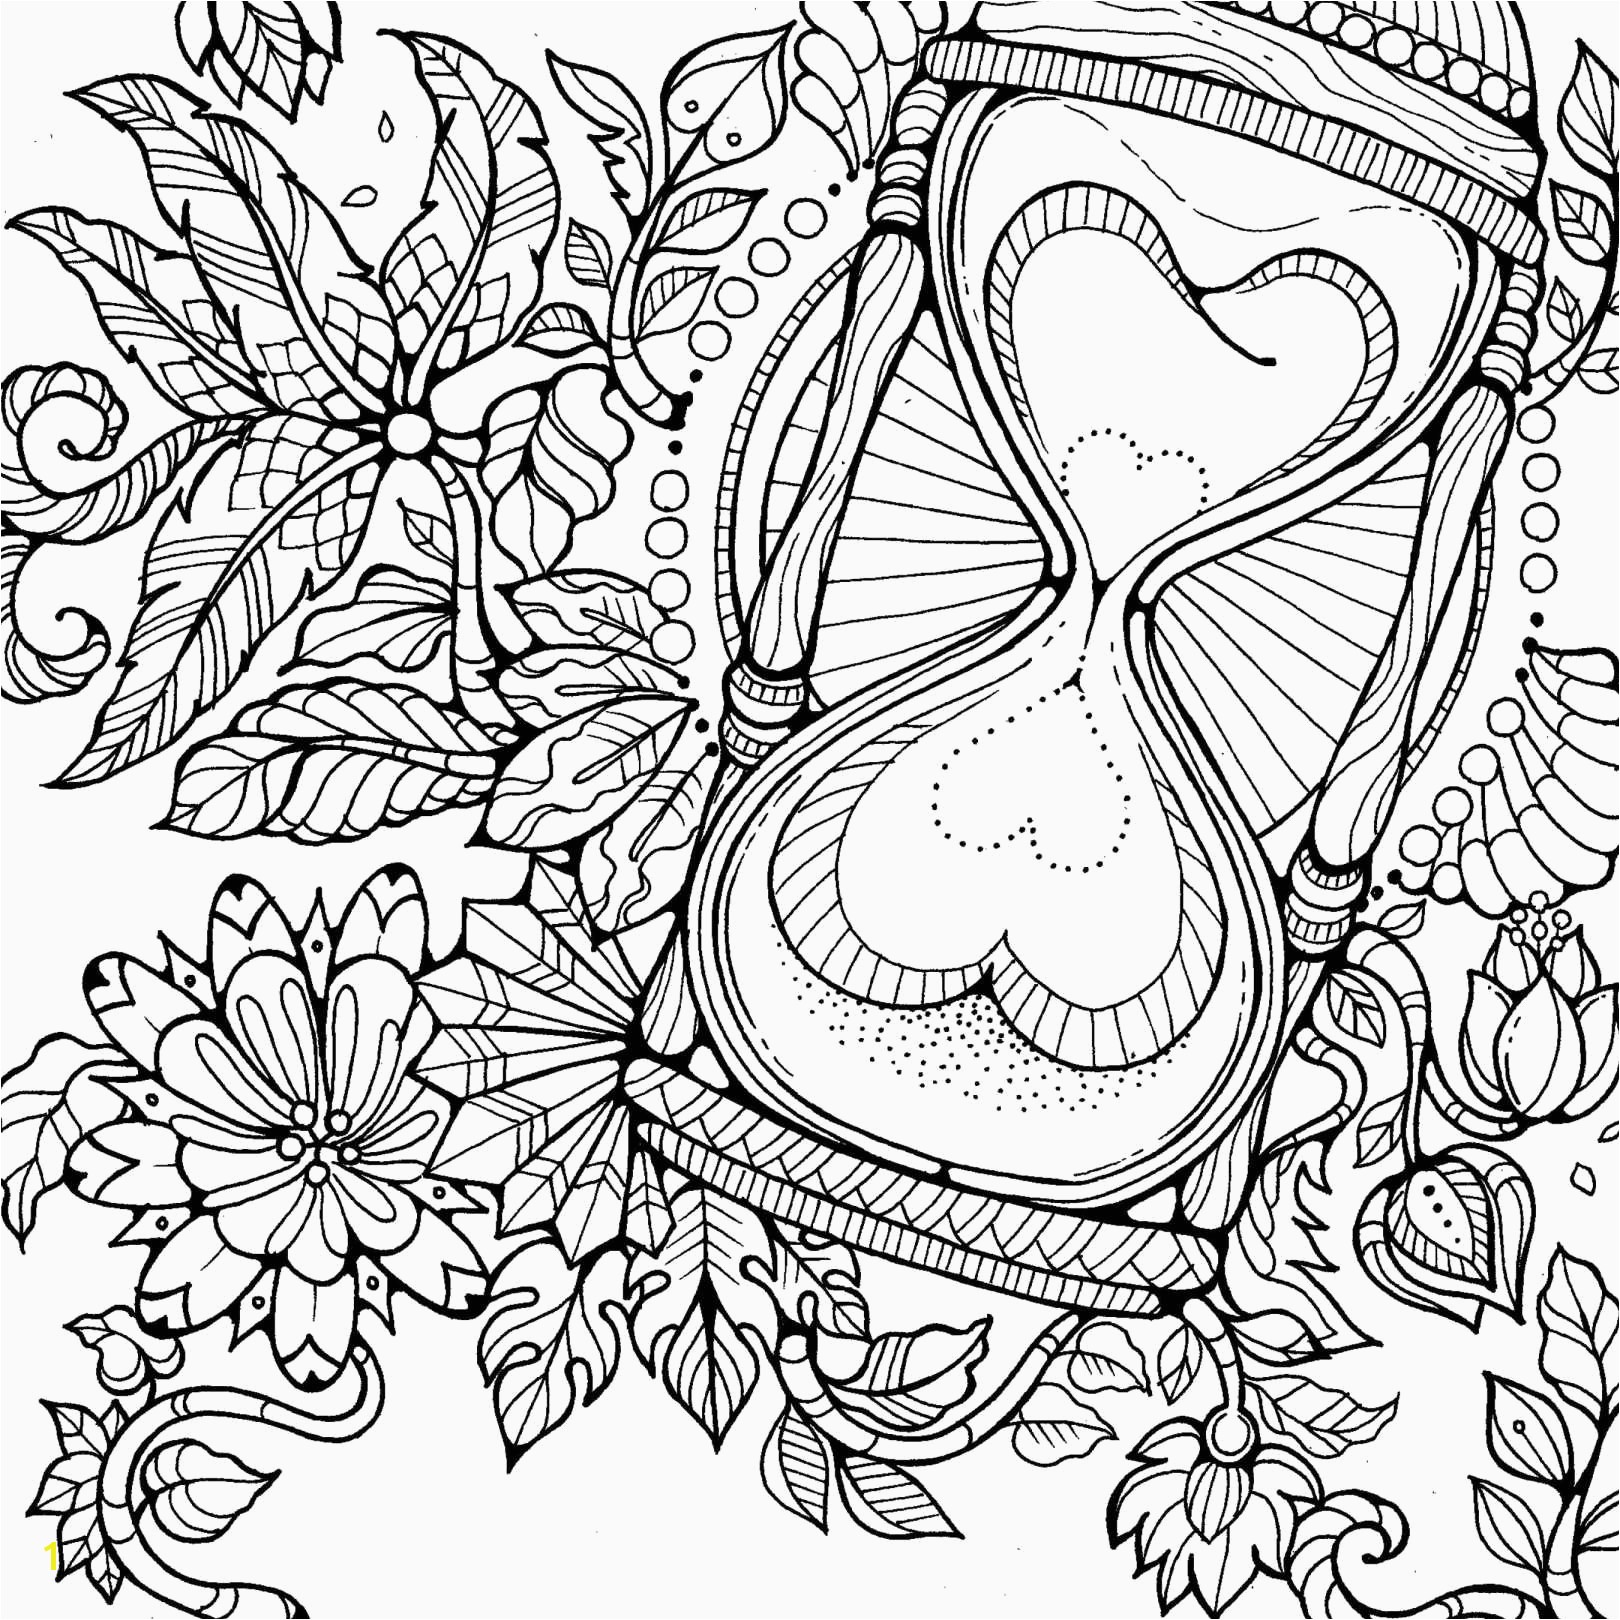 Coloring Pages Precious Moments Precious Moments Cowboy Coloring Pages Download